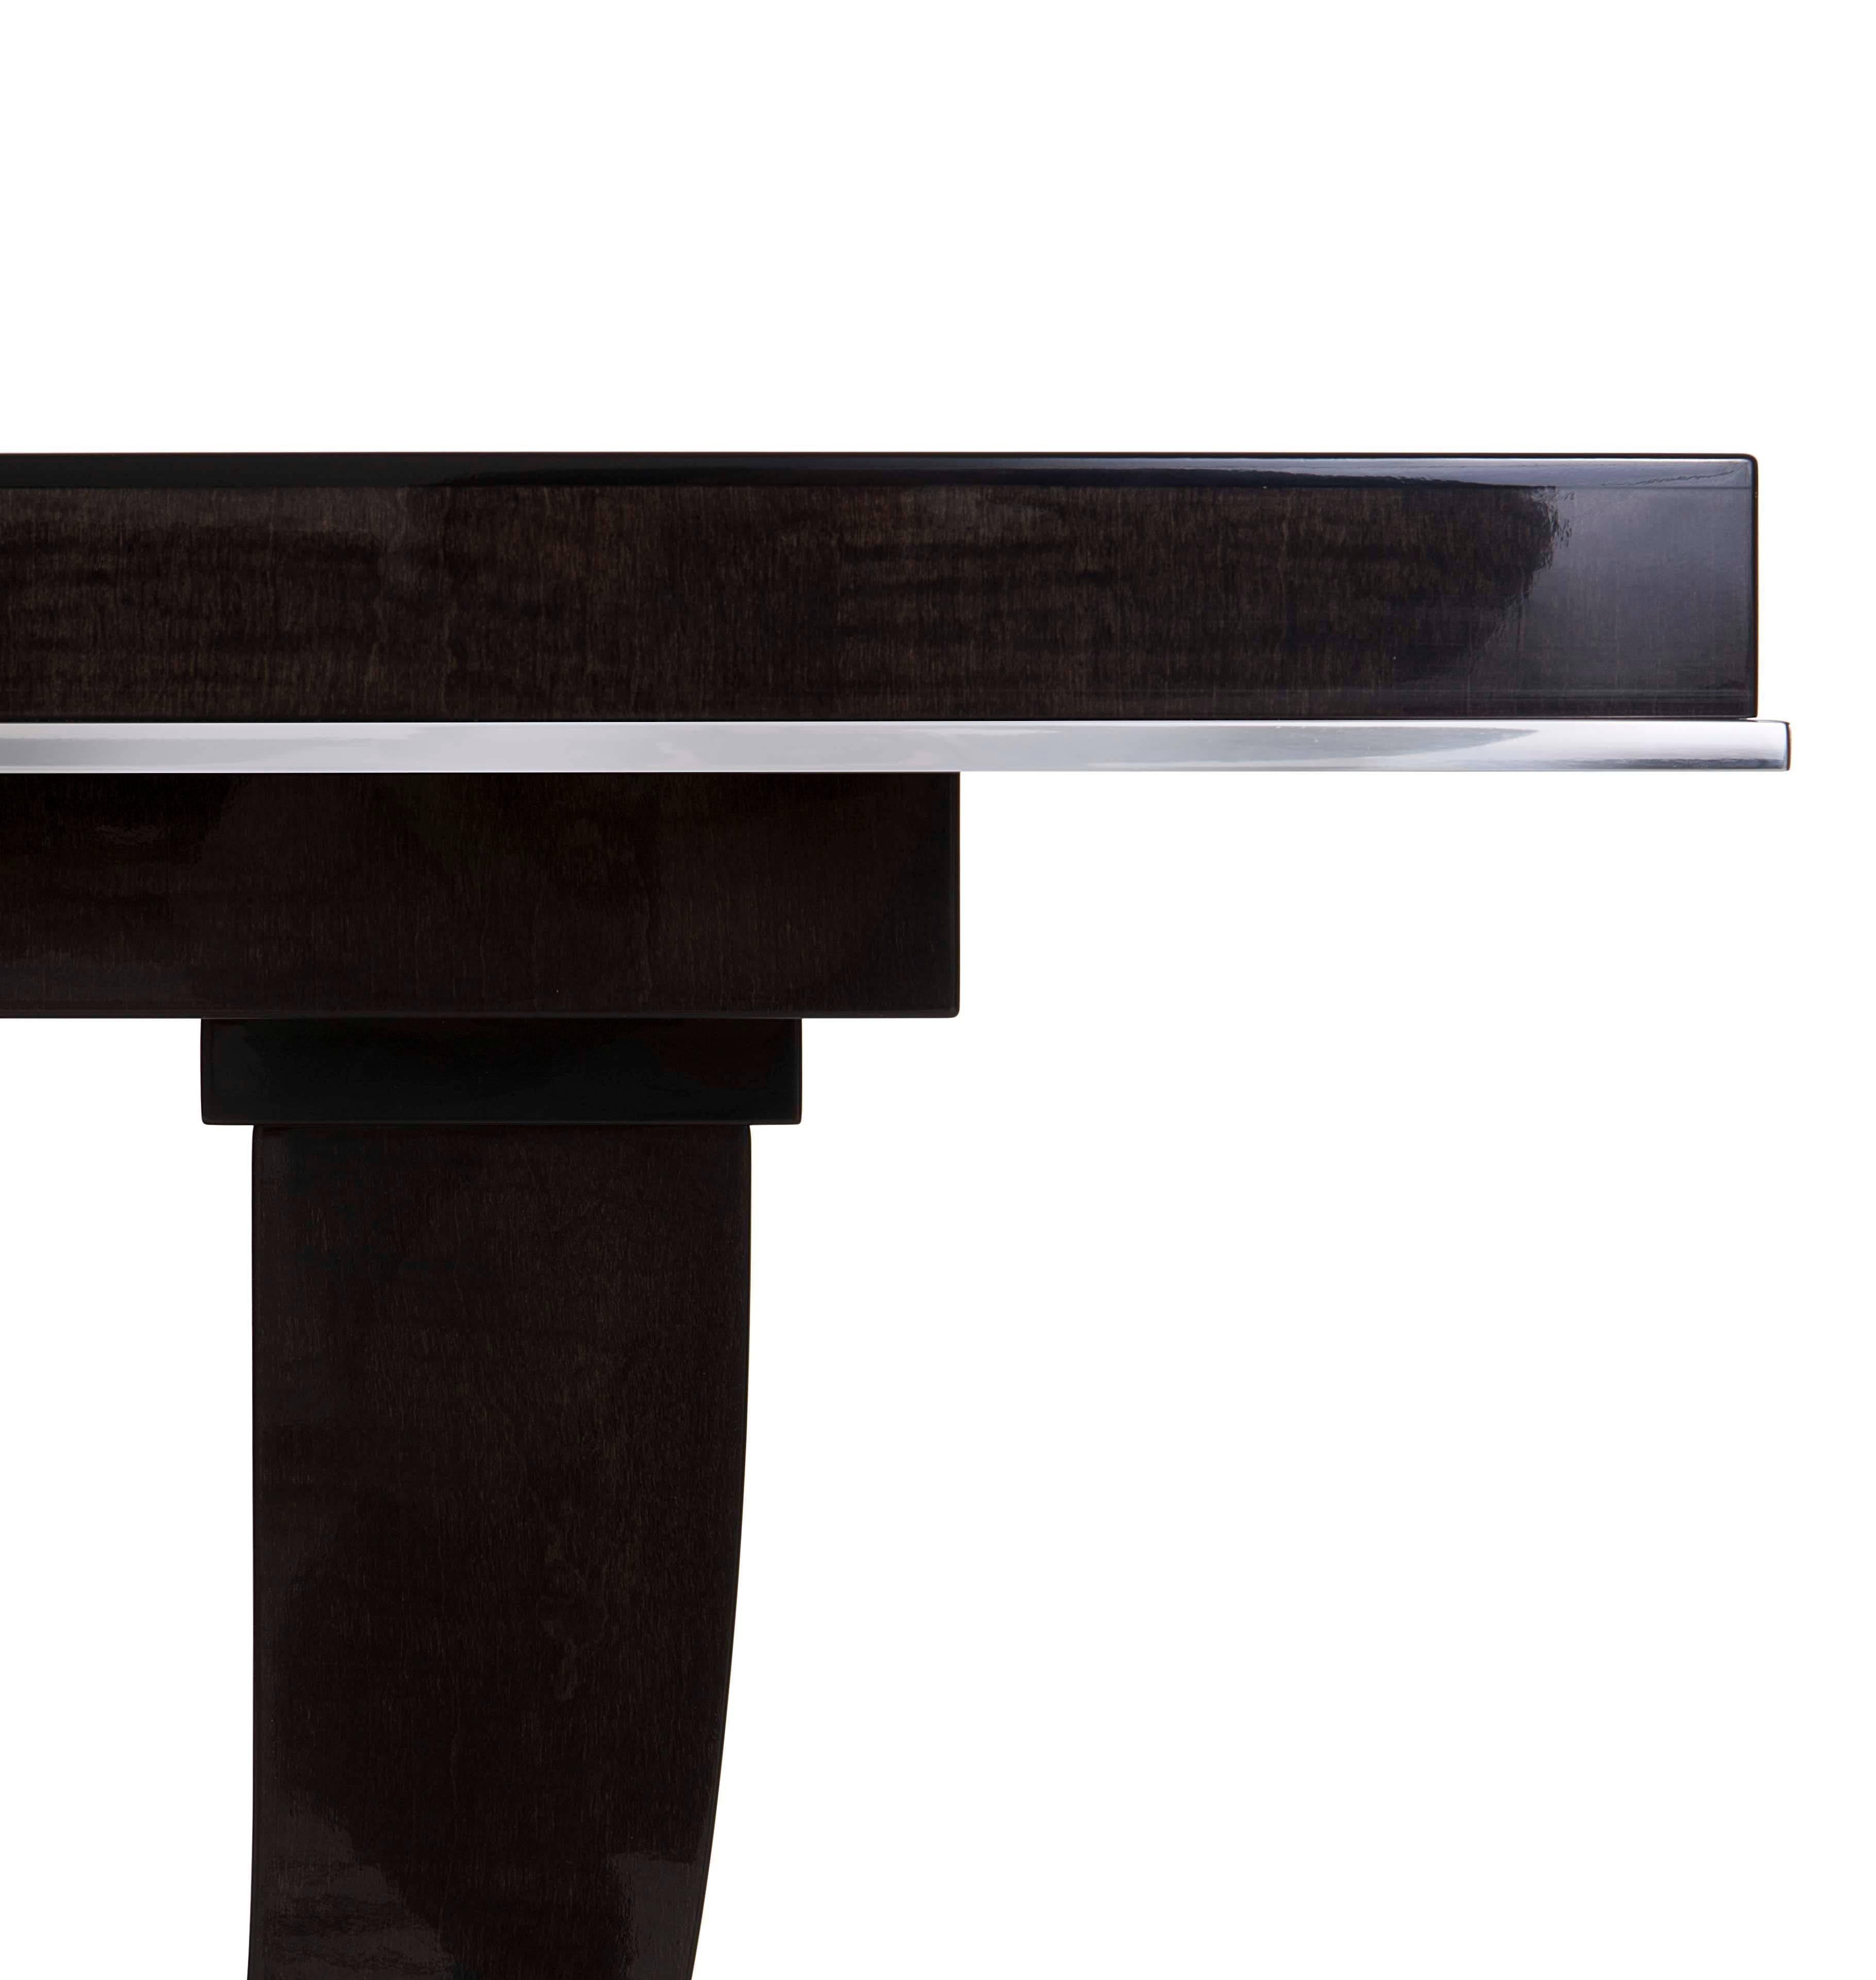 An Art Deco inspired console finished in sycamore black with polished nickel detail.

The Albany console exudes sophisticated Art Deco style with a silhouette directly inspired by the work of iconic furniture designer Emile-Jacques Ruhlmann. The